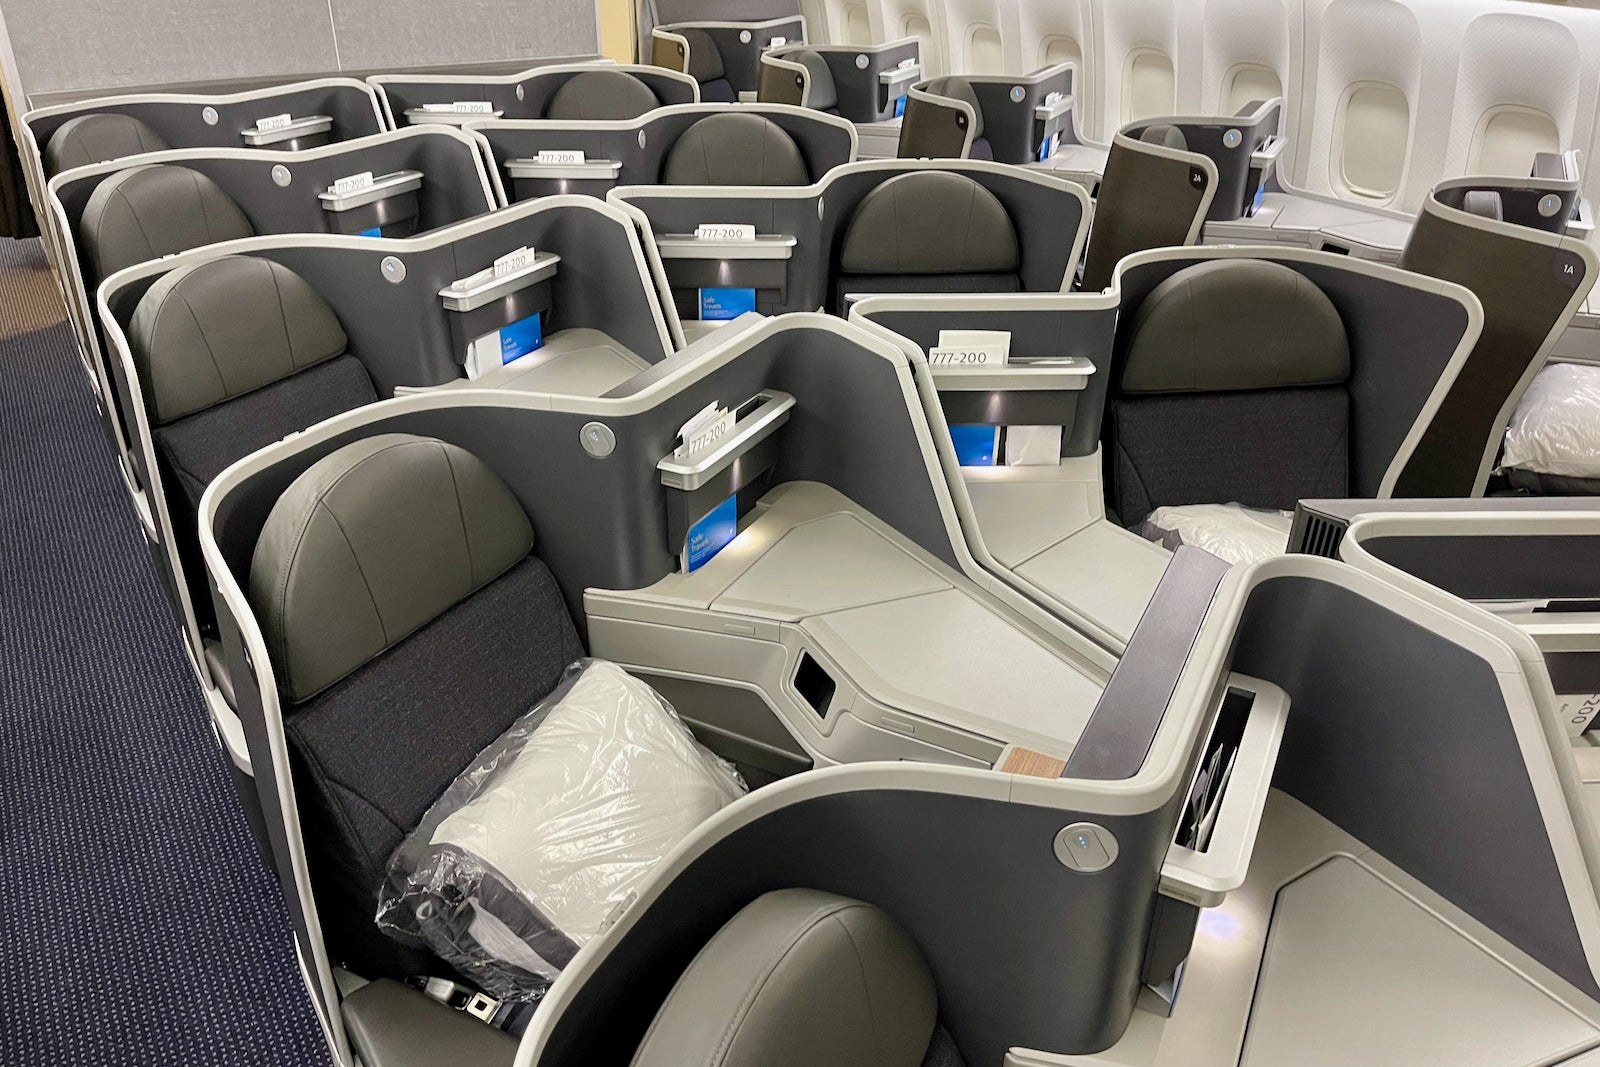 American Airlines business class cabin